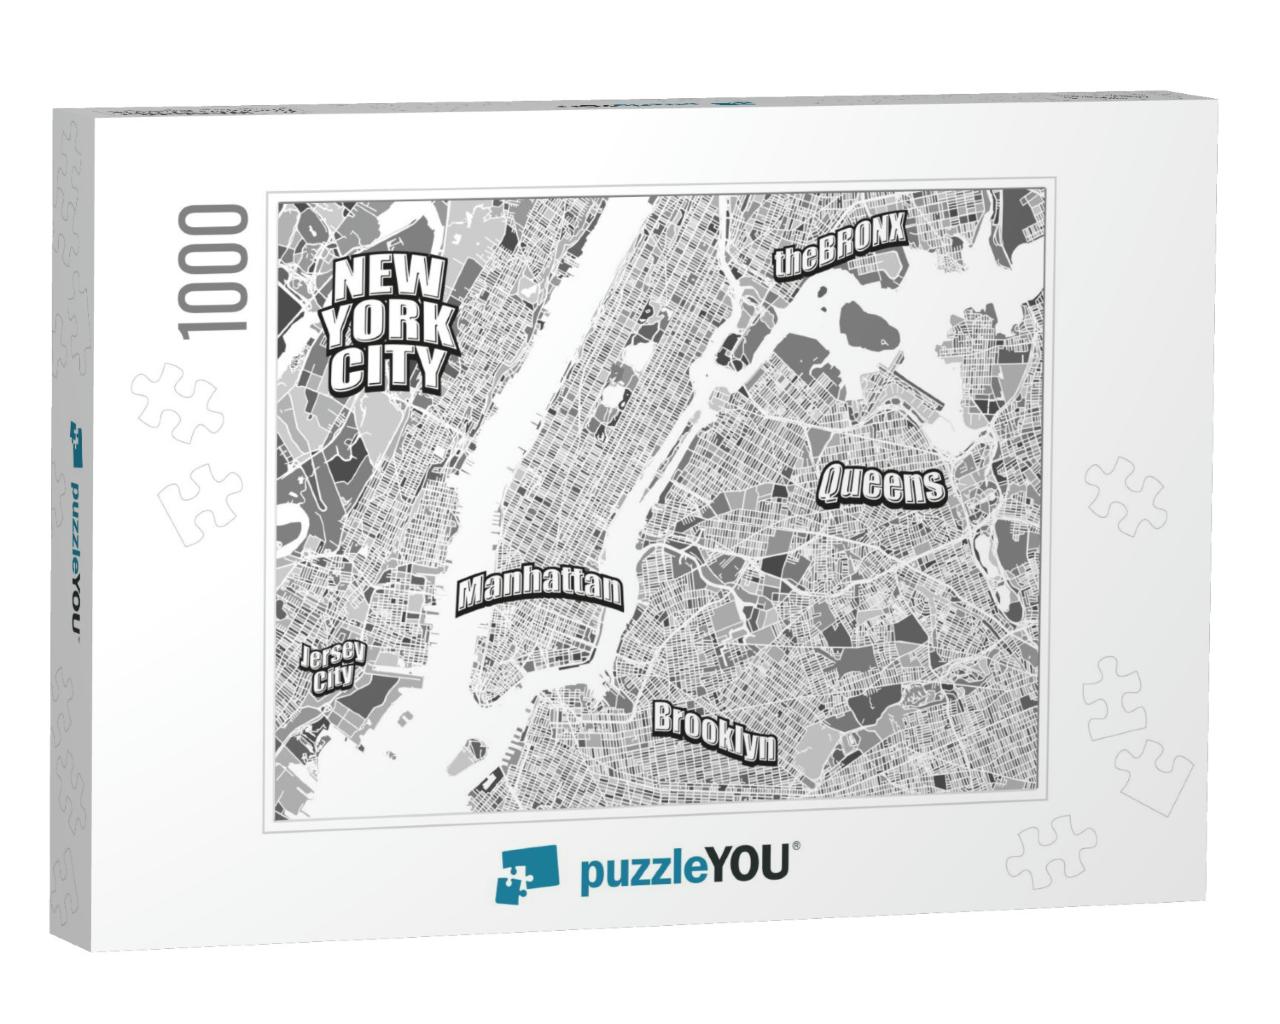 New York City District Map. Very Detailed Version Without... Jigsaw Puzzle with 1000 pieces